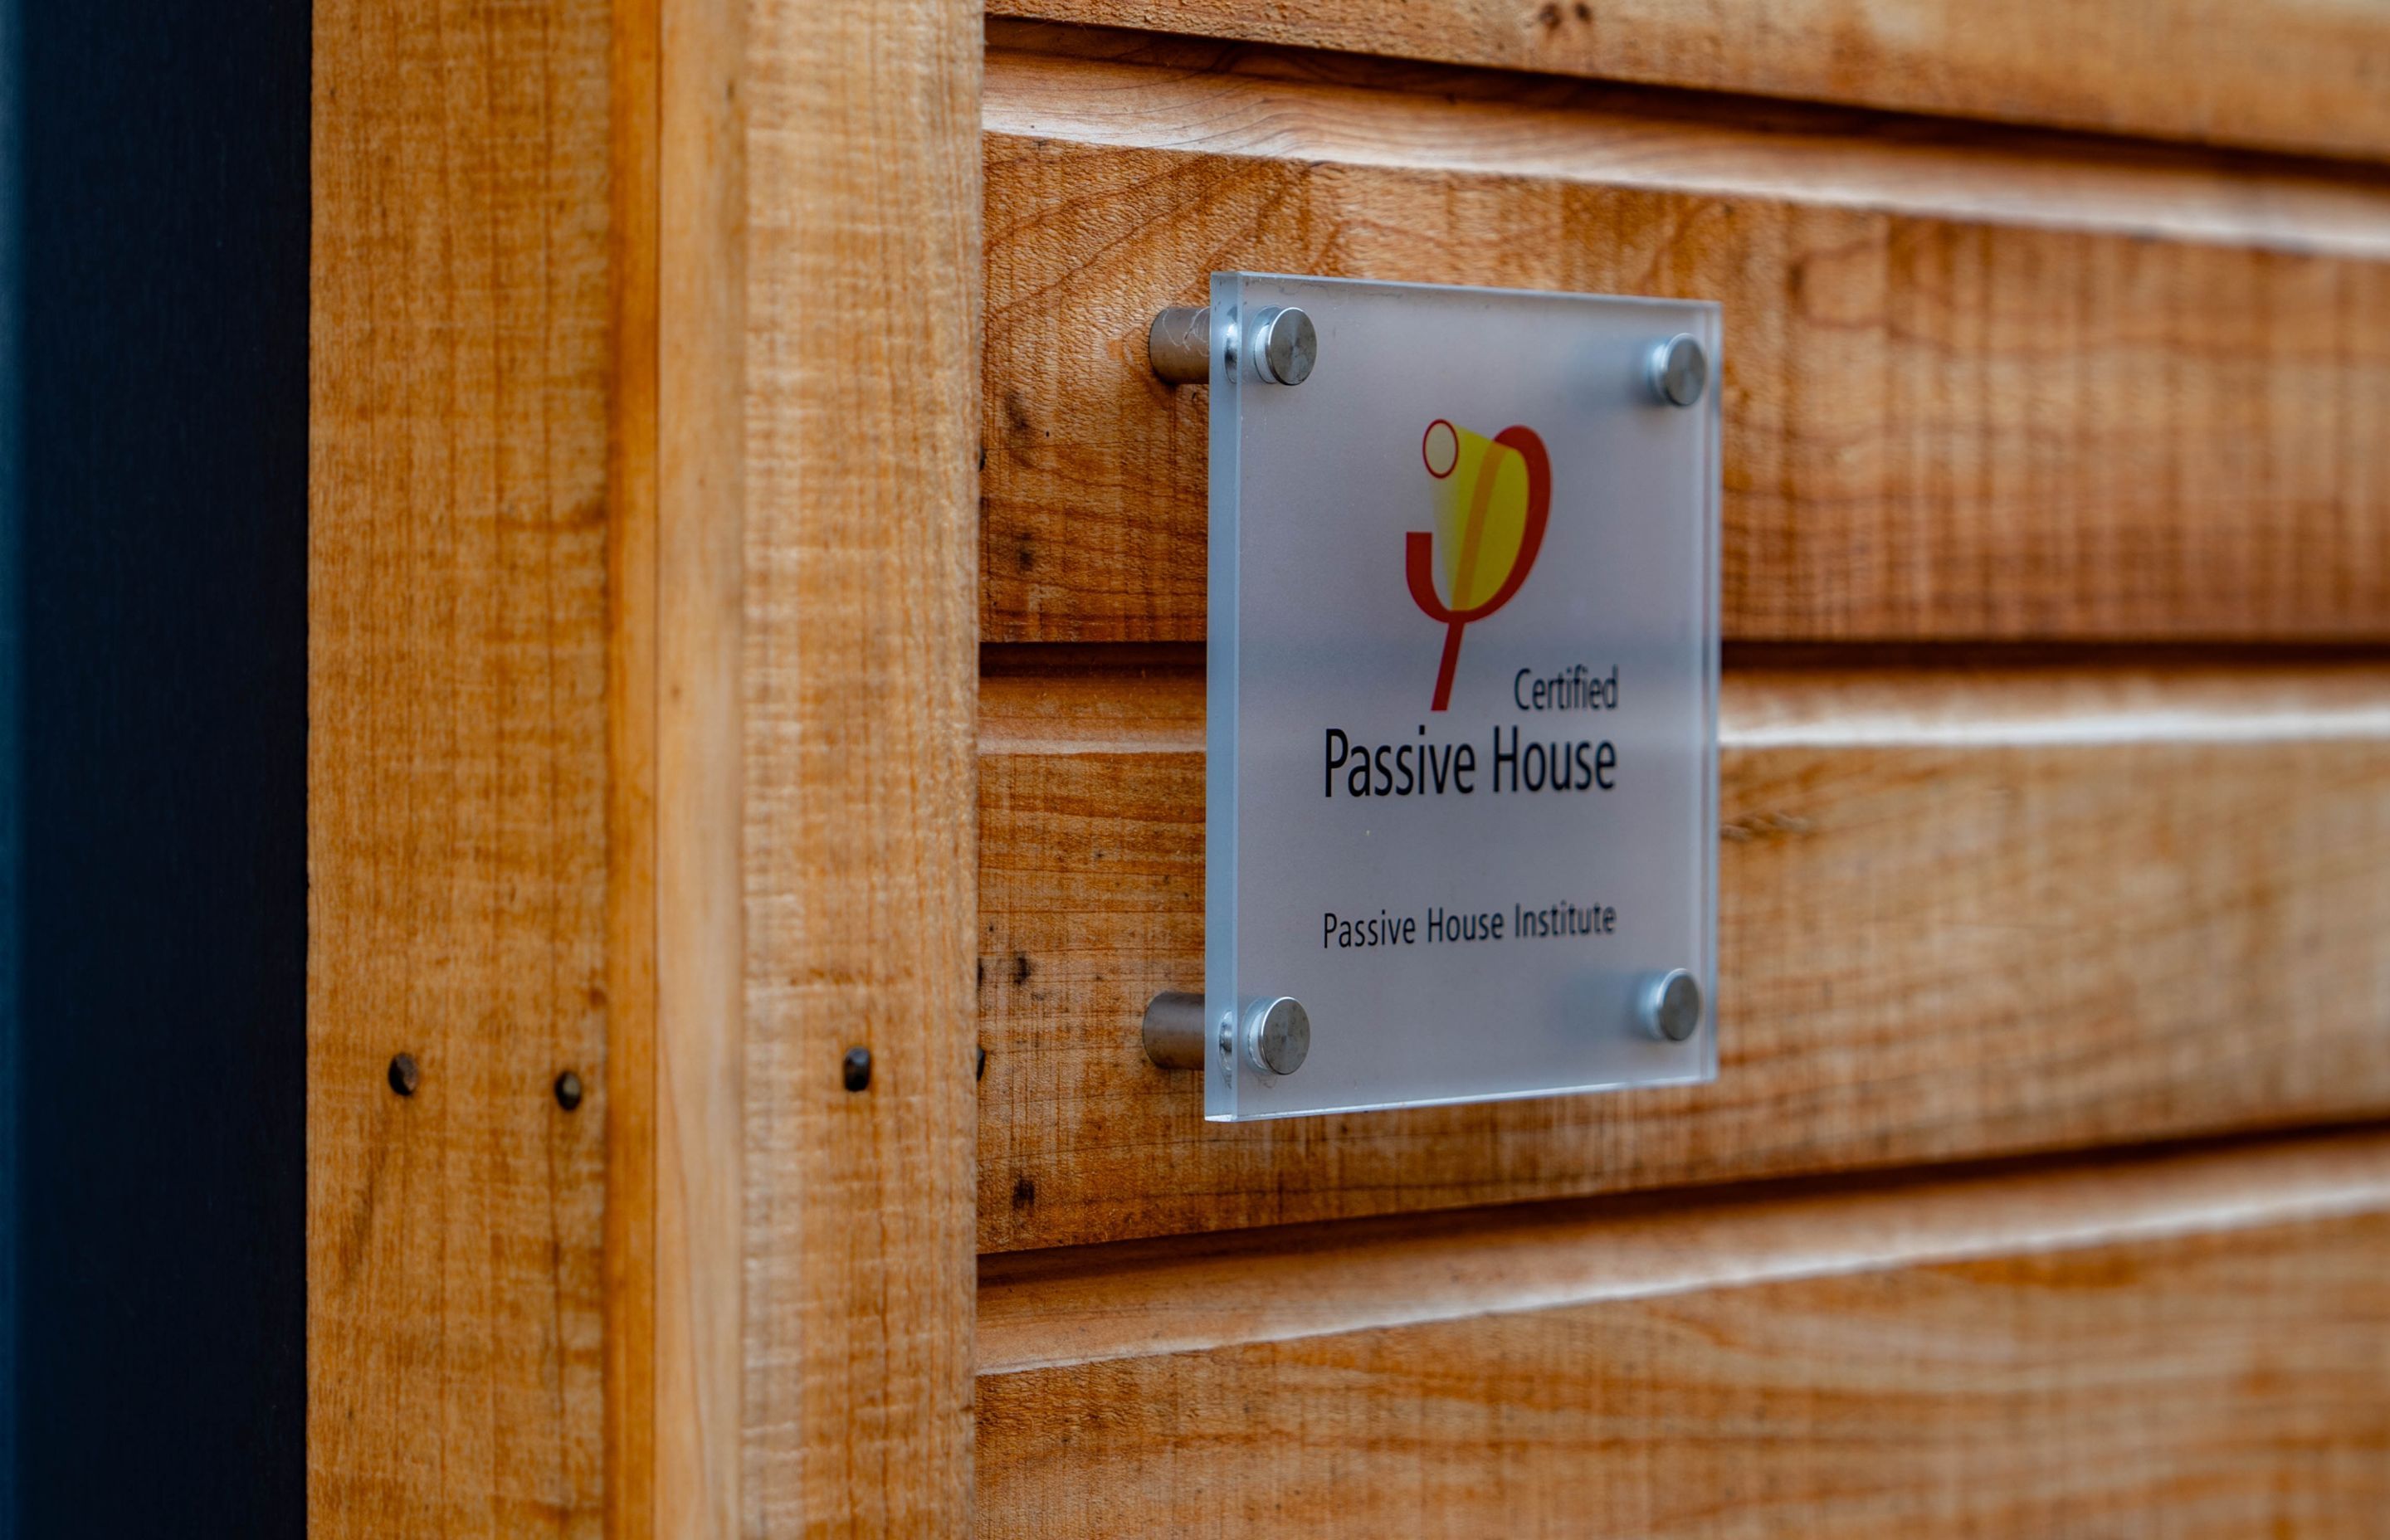 The home has been certified by the Passive House Institute.